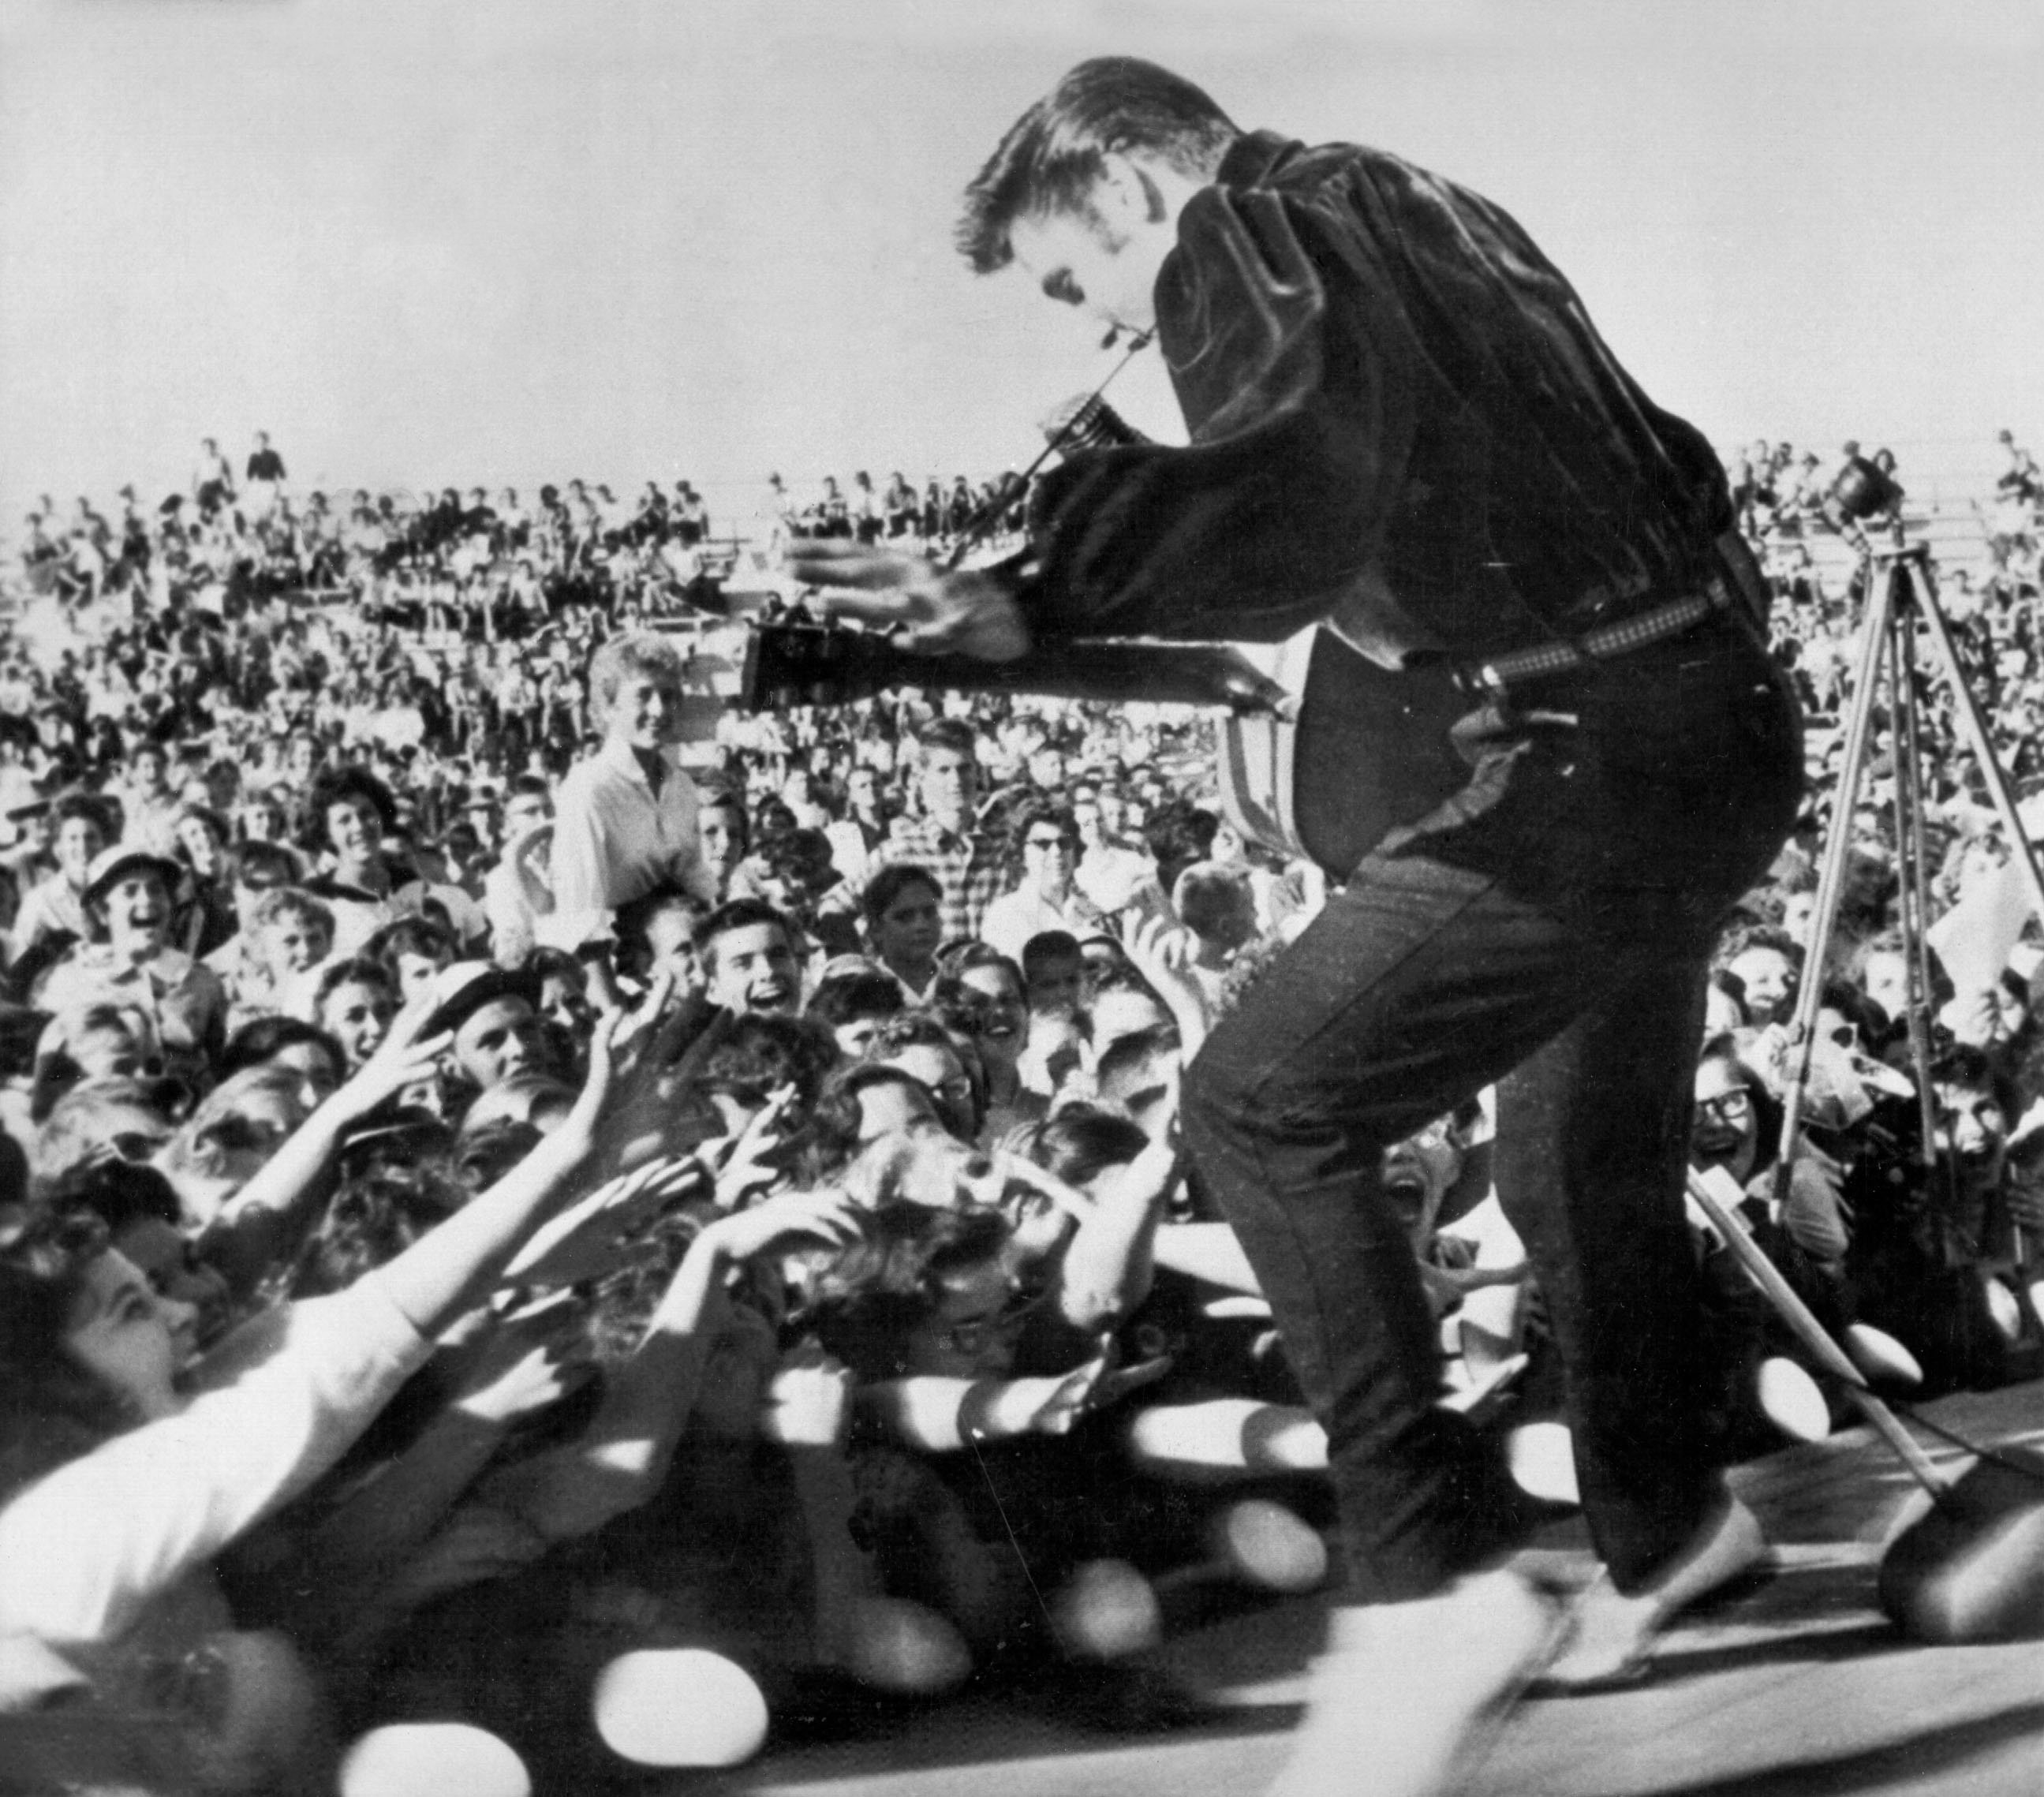 Elvis Presley performing a song in front of fans